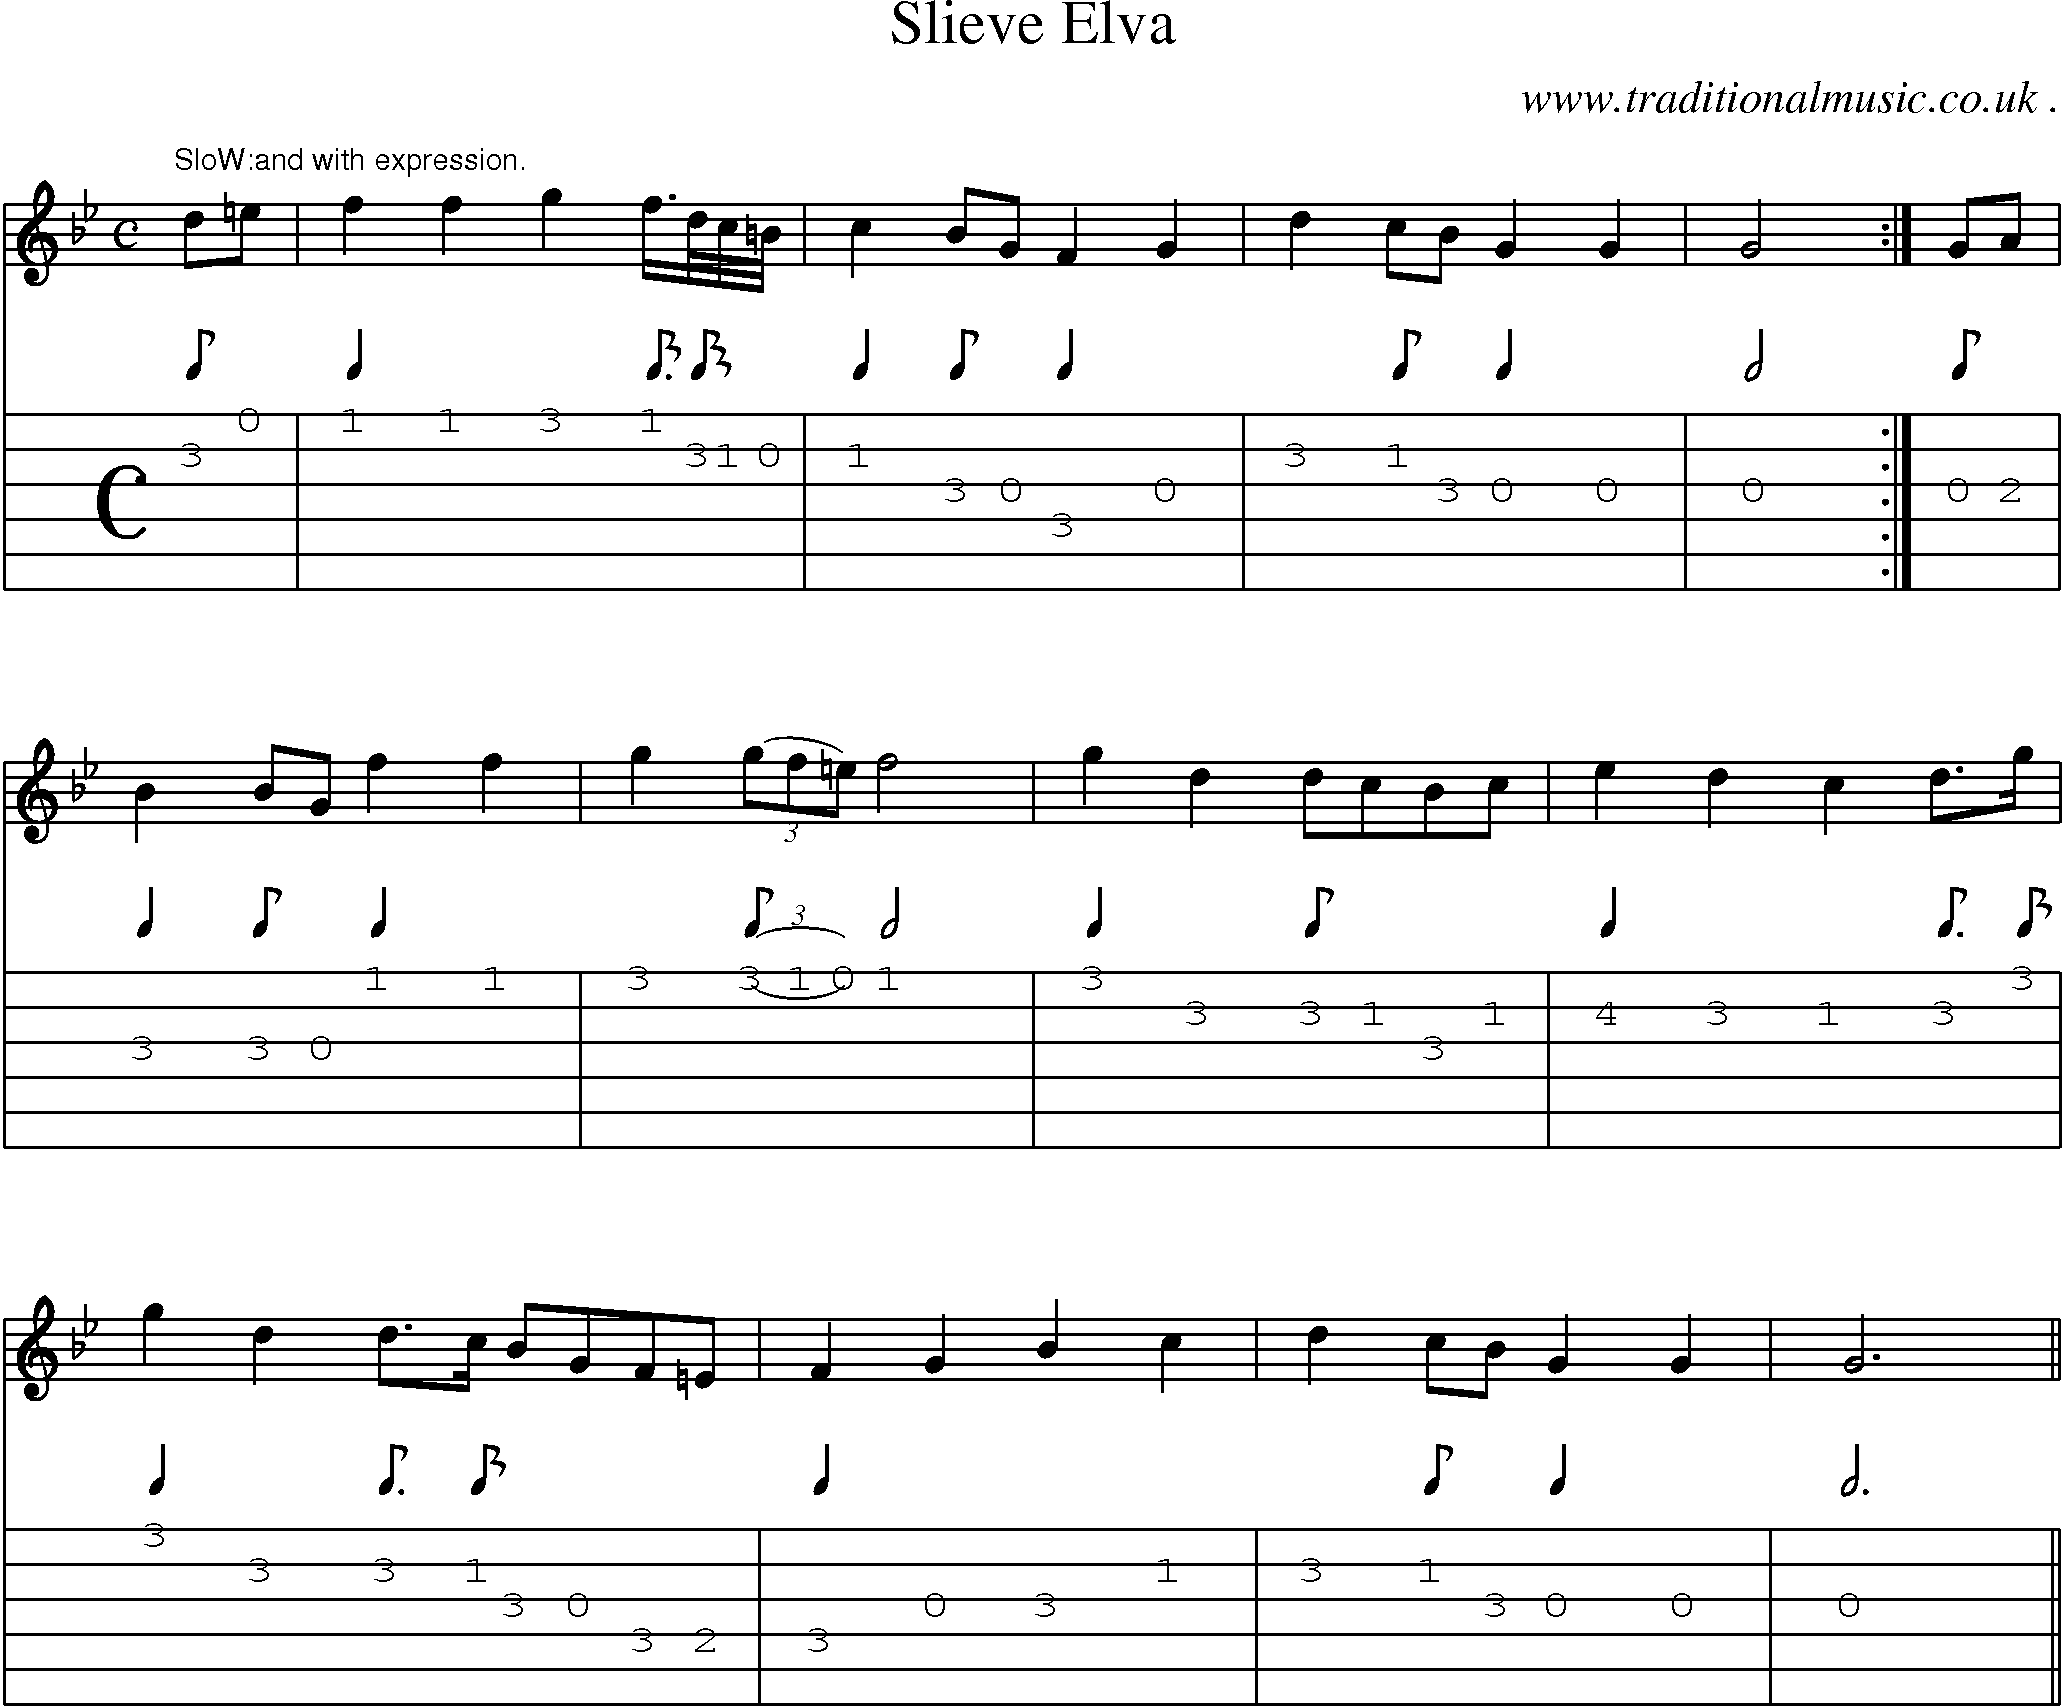 Sheet-Music and Guitar Tabs for Slieve Elva